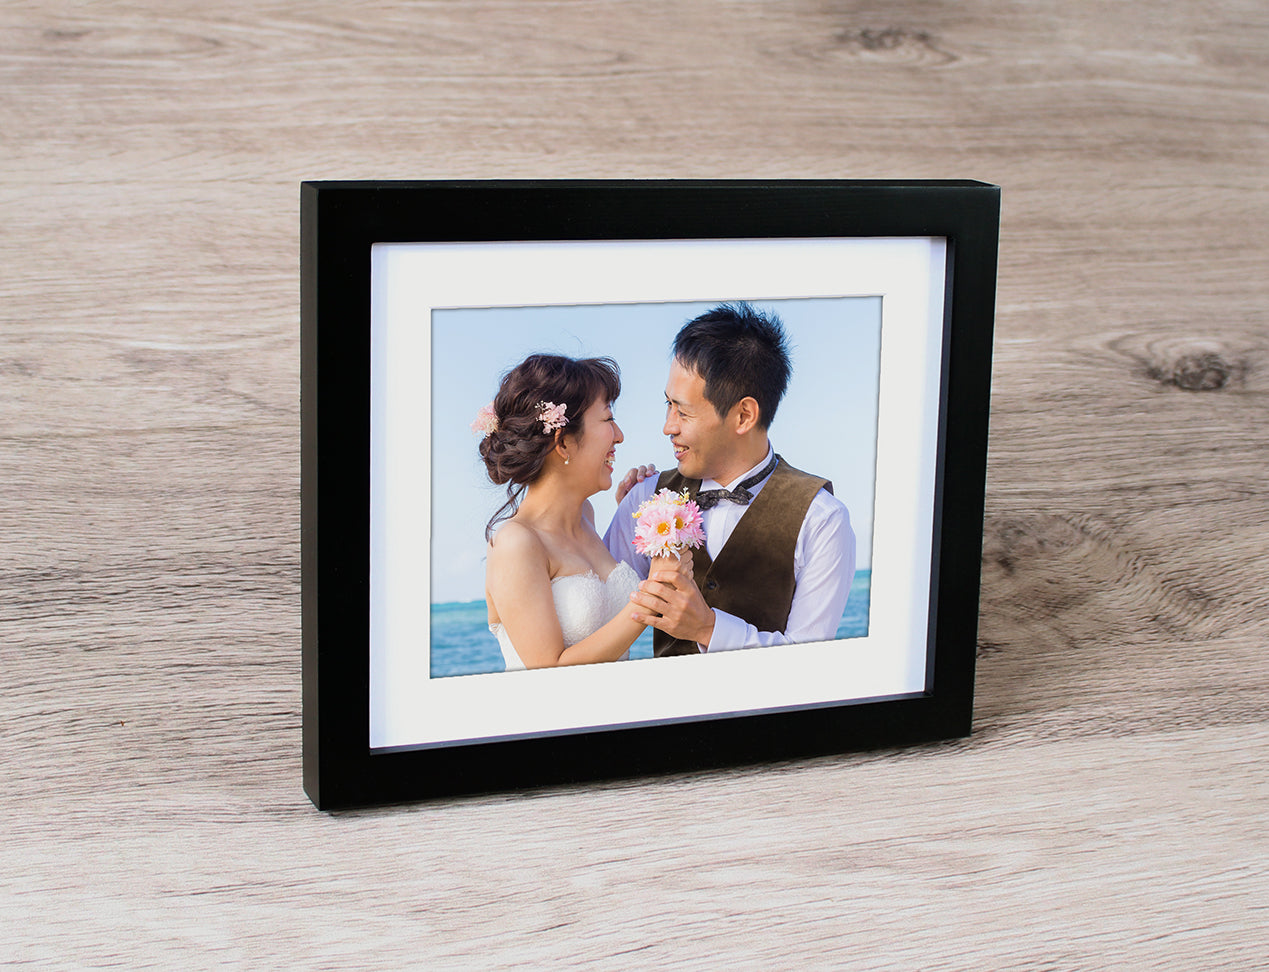 Framed Photo of couple with thick black frame and white mat board